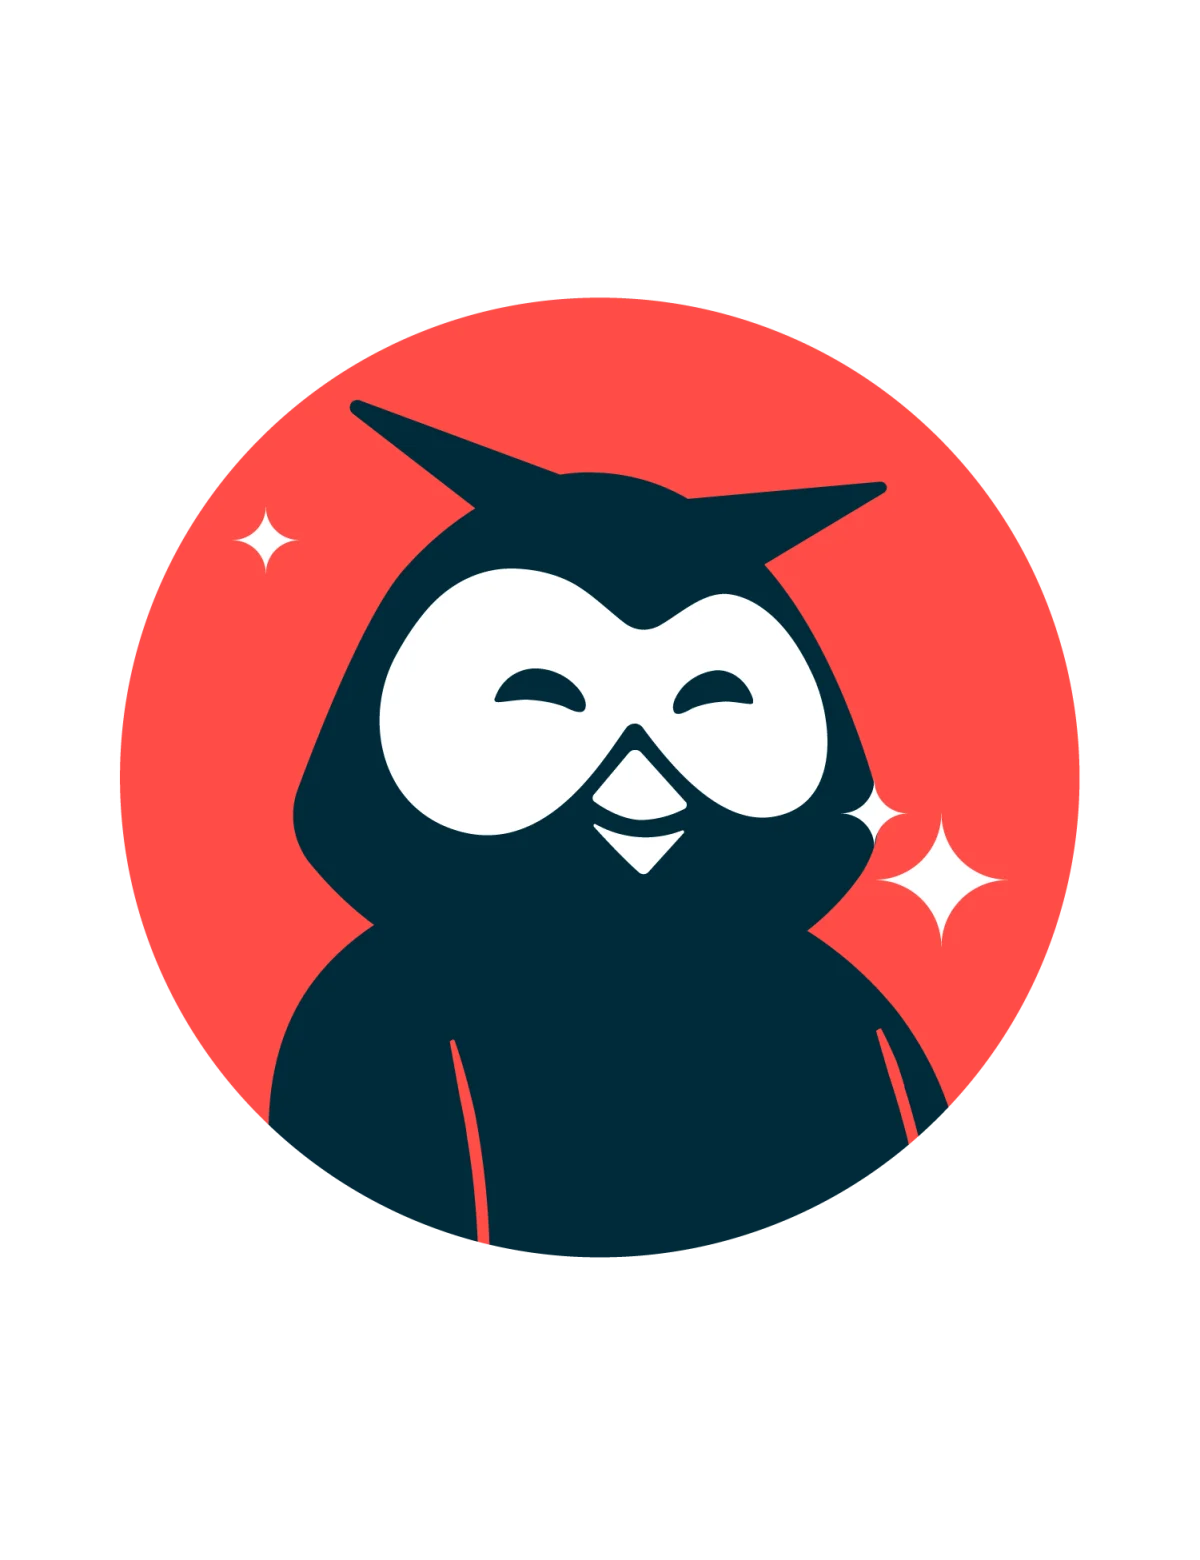 Hero graphic of Hootsuite's mascot, Owly, smiling